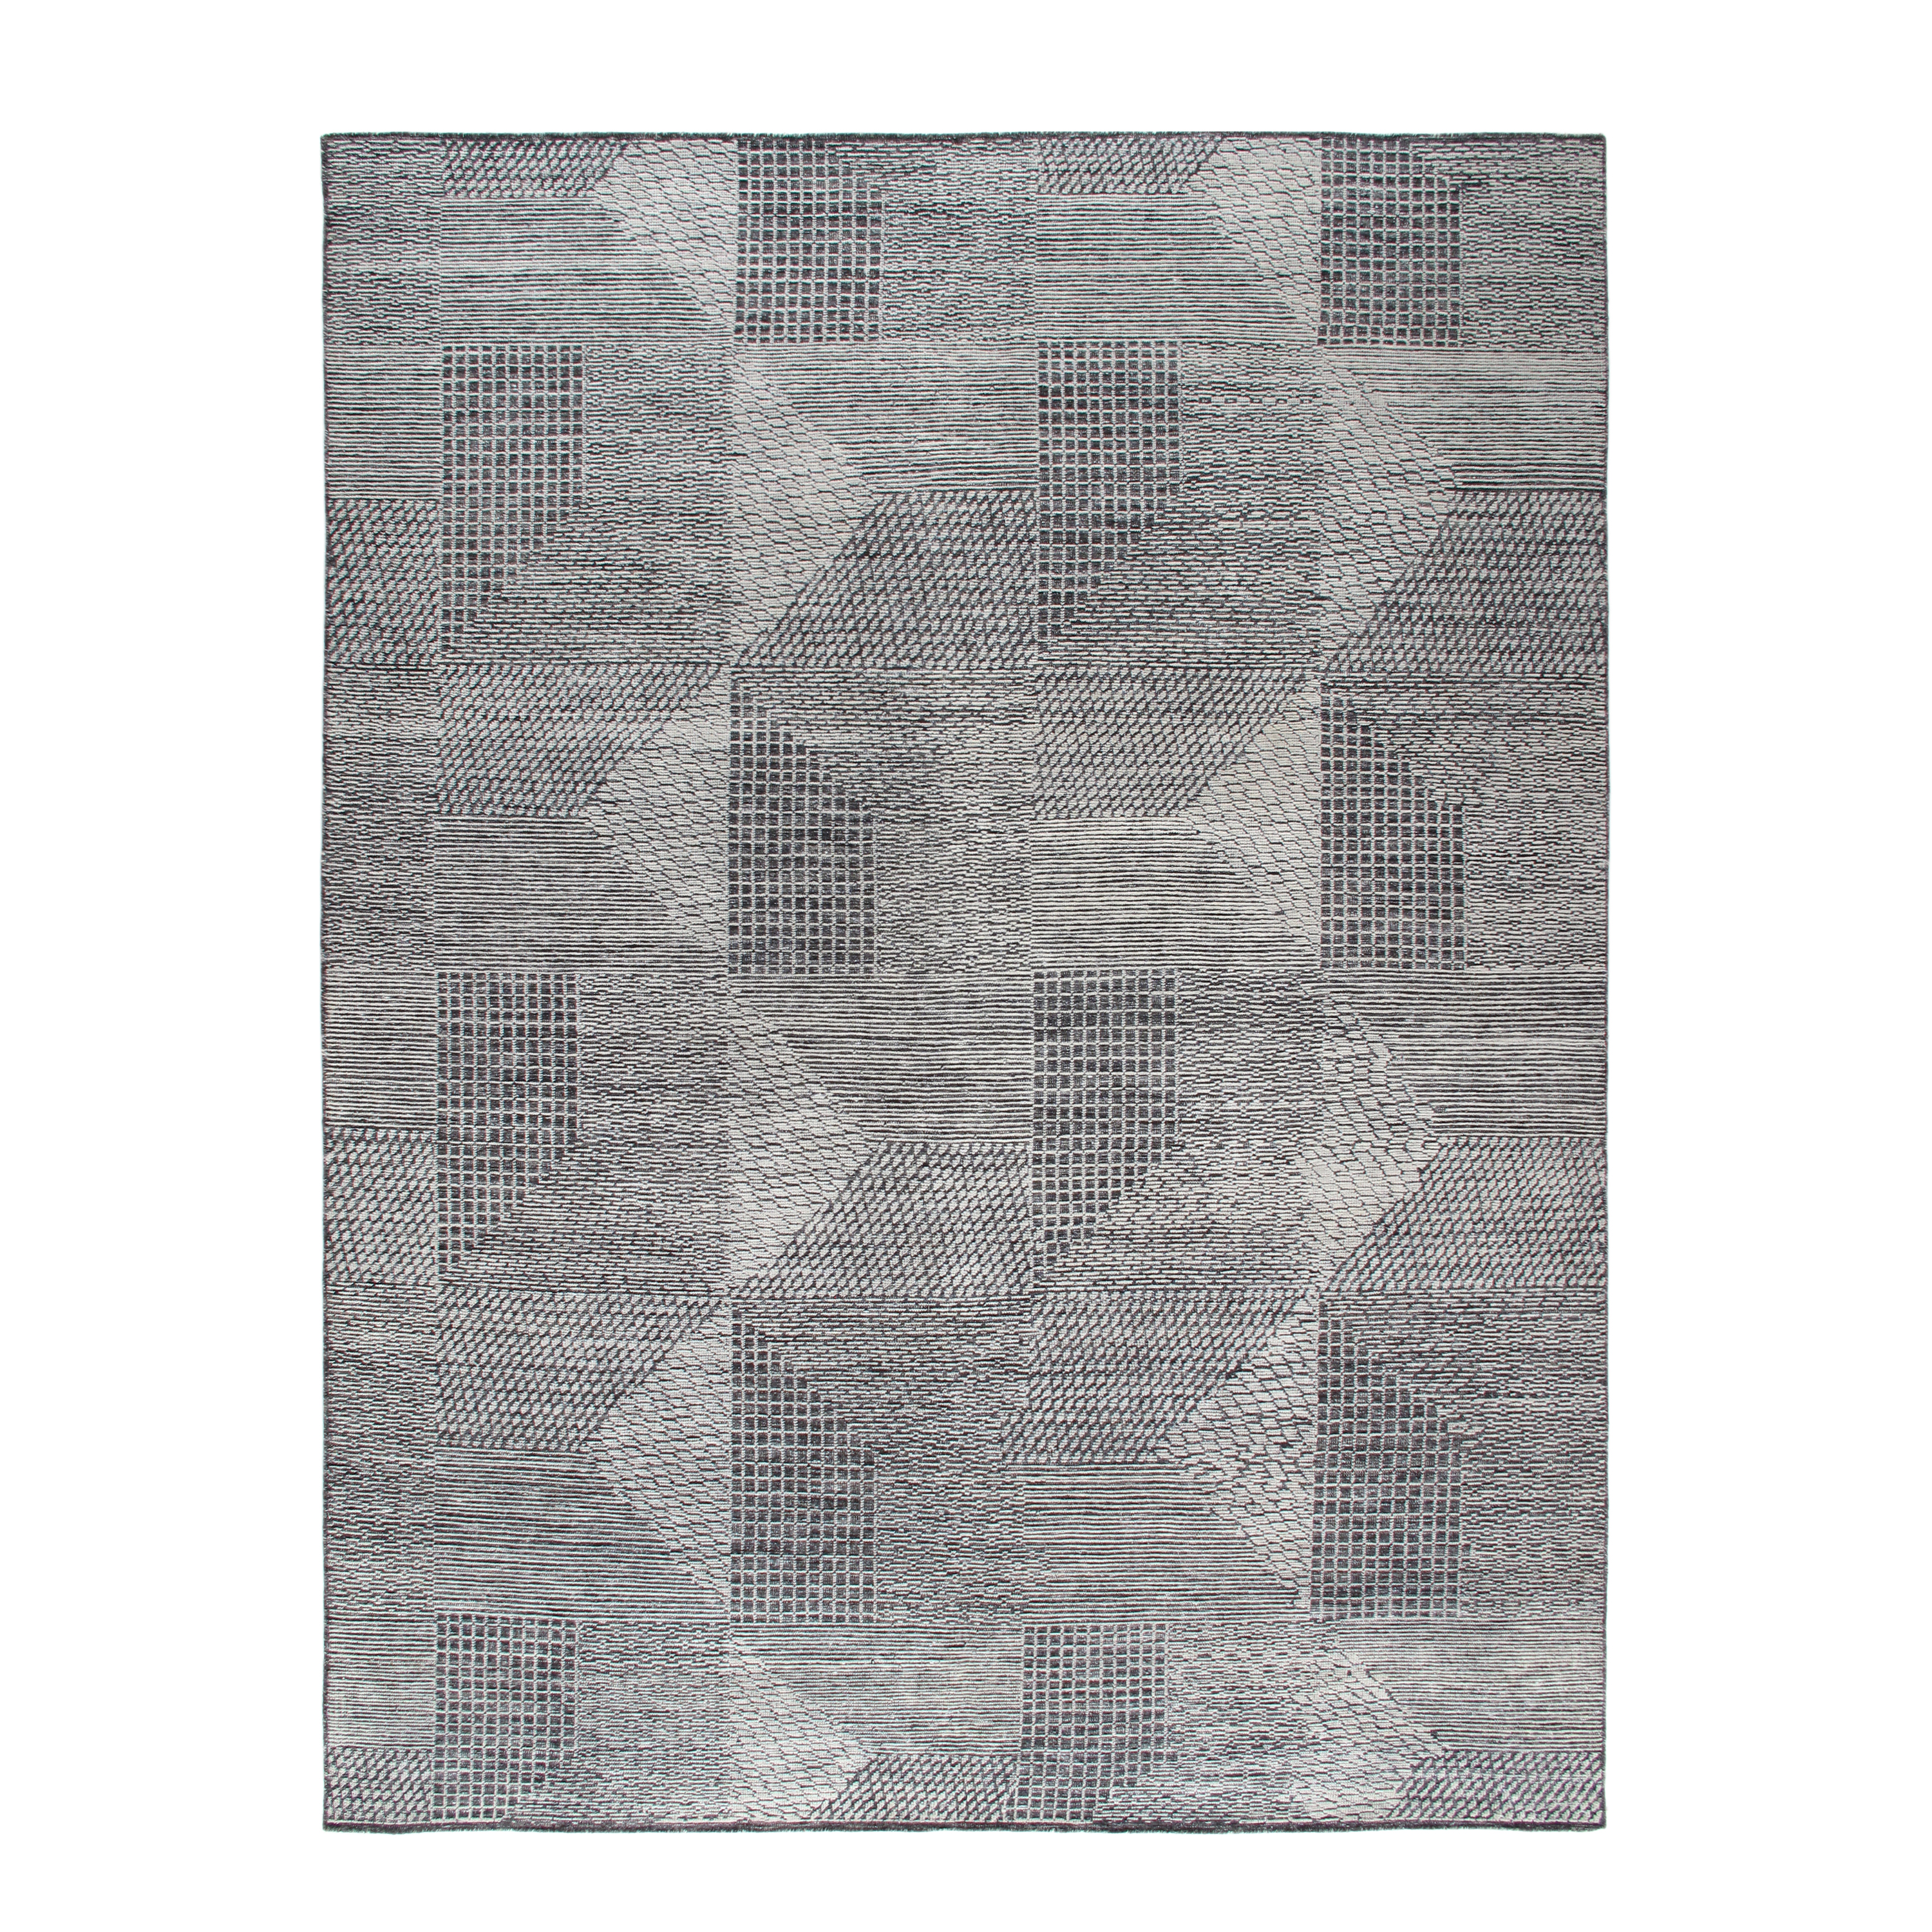 This Mosaic rug is hand-knotted and made of 100% wool. 